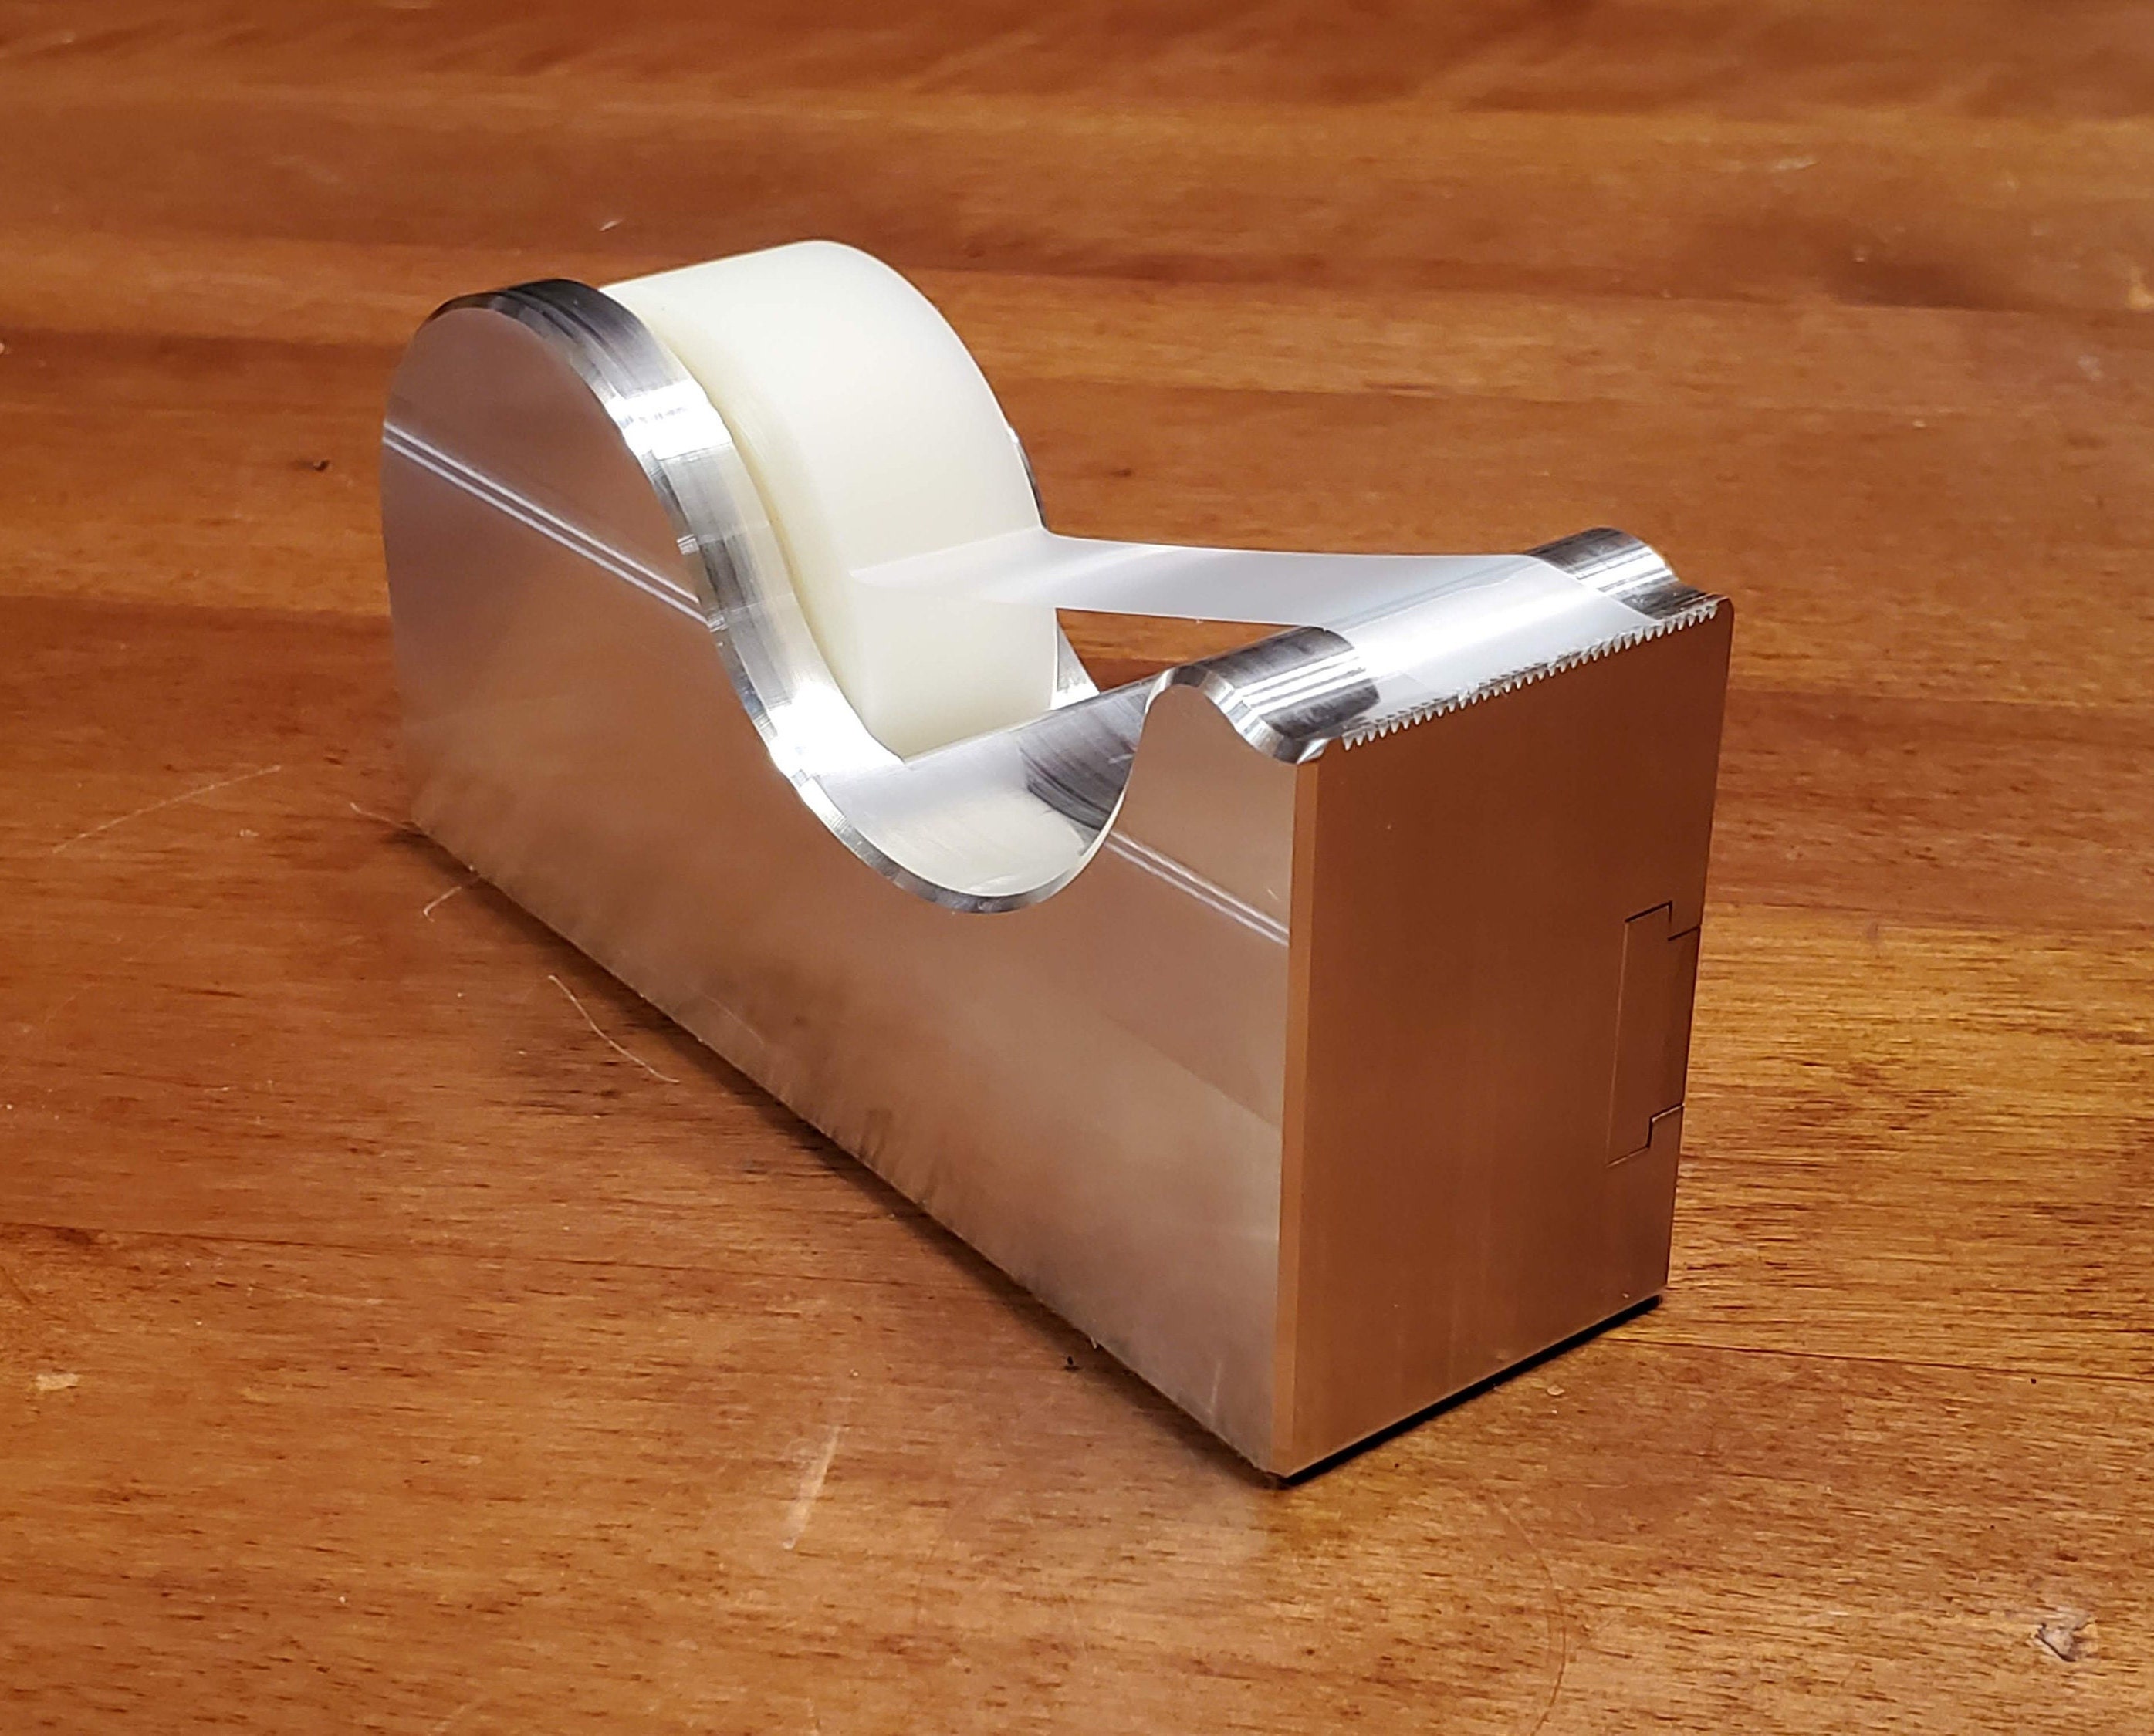 Modernist Industrial Style CNC Machined Solid Aluminum Tape Dispenser 